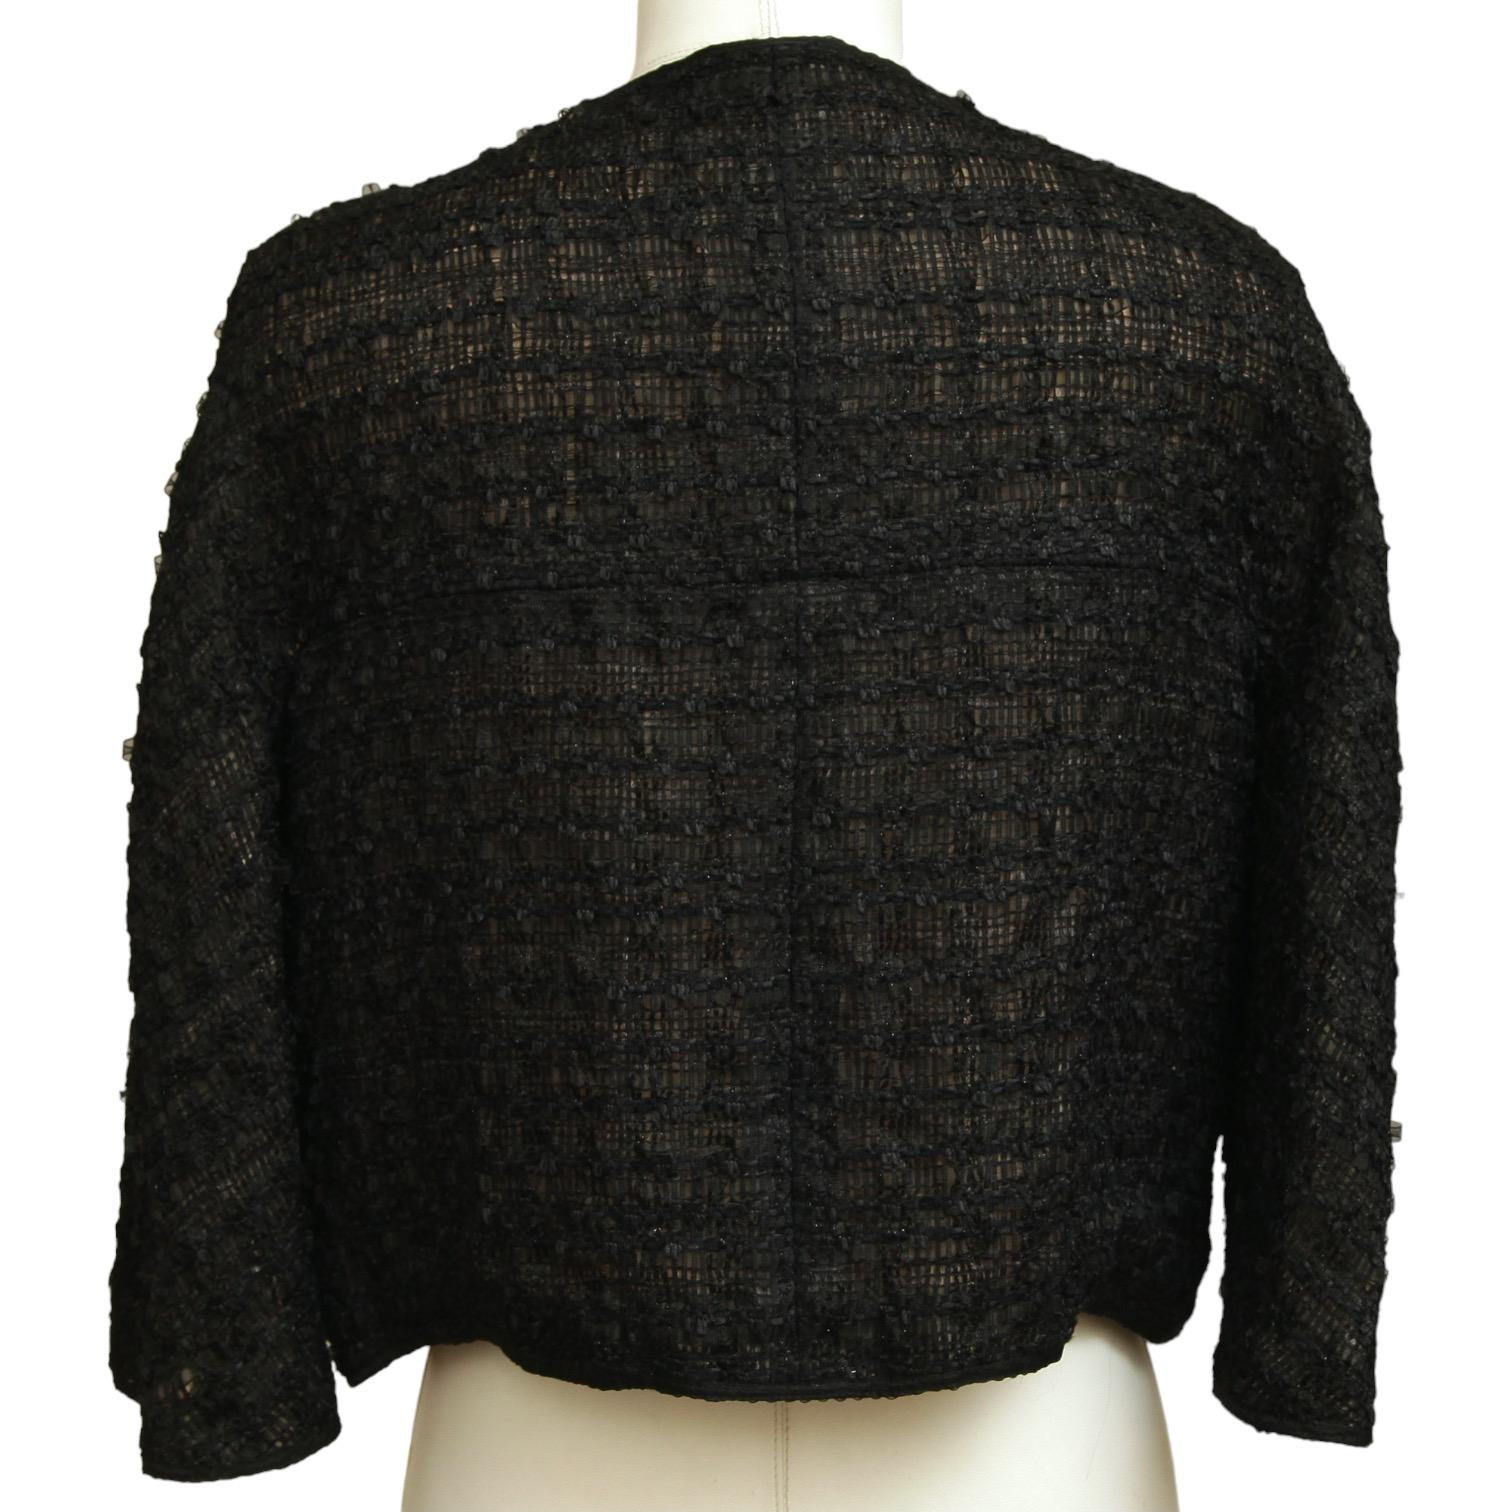 Women's CHANEL Black Tweed Jacket Fantasy Hook Eye Buttons Pockets Gold Chain Sz 36 2012 For Sale